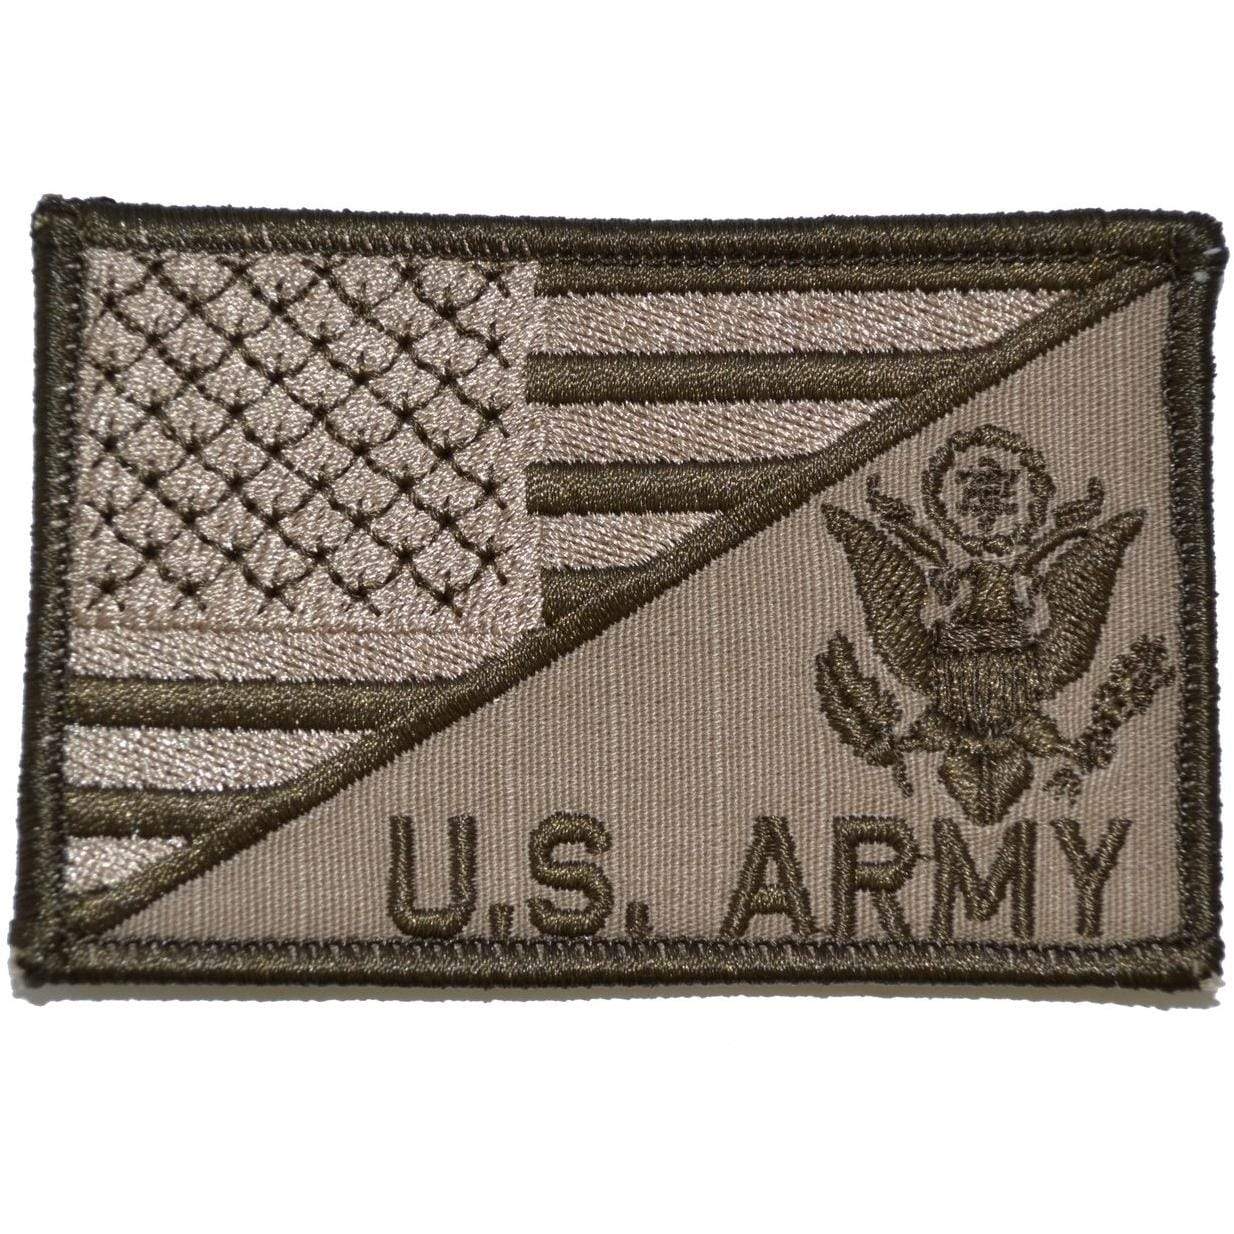 Tactical Gear Junkie Patches Coyote Brown US Army Crest With Text USA Flag - 2.25x3.5 Patch